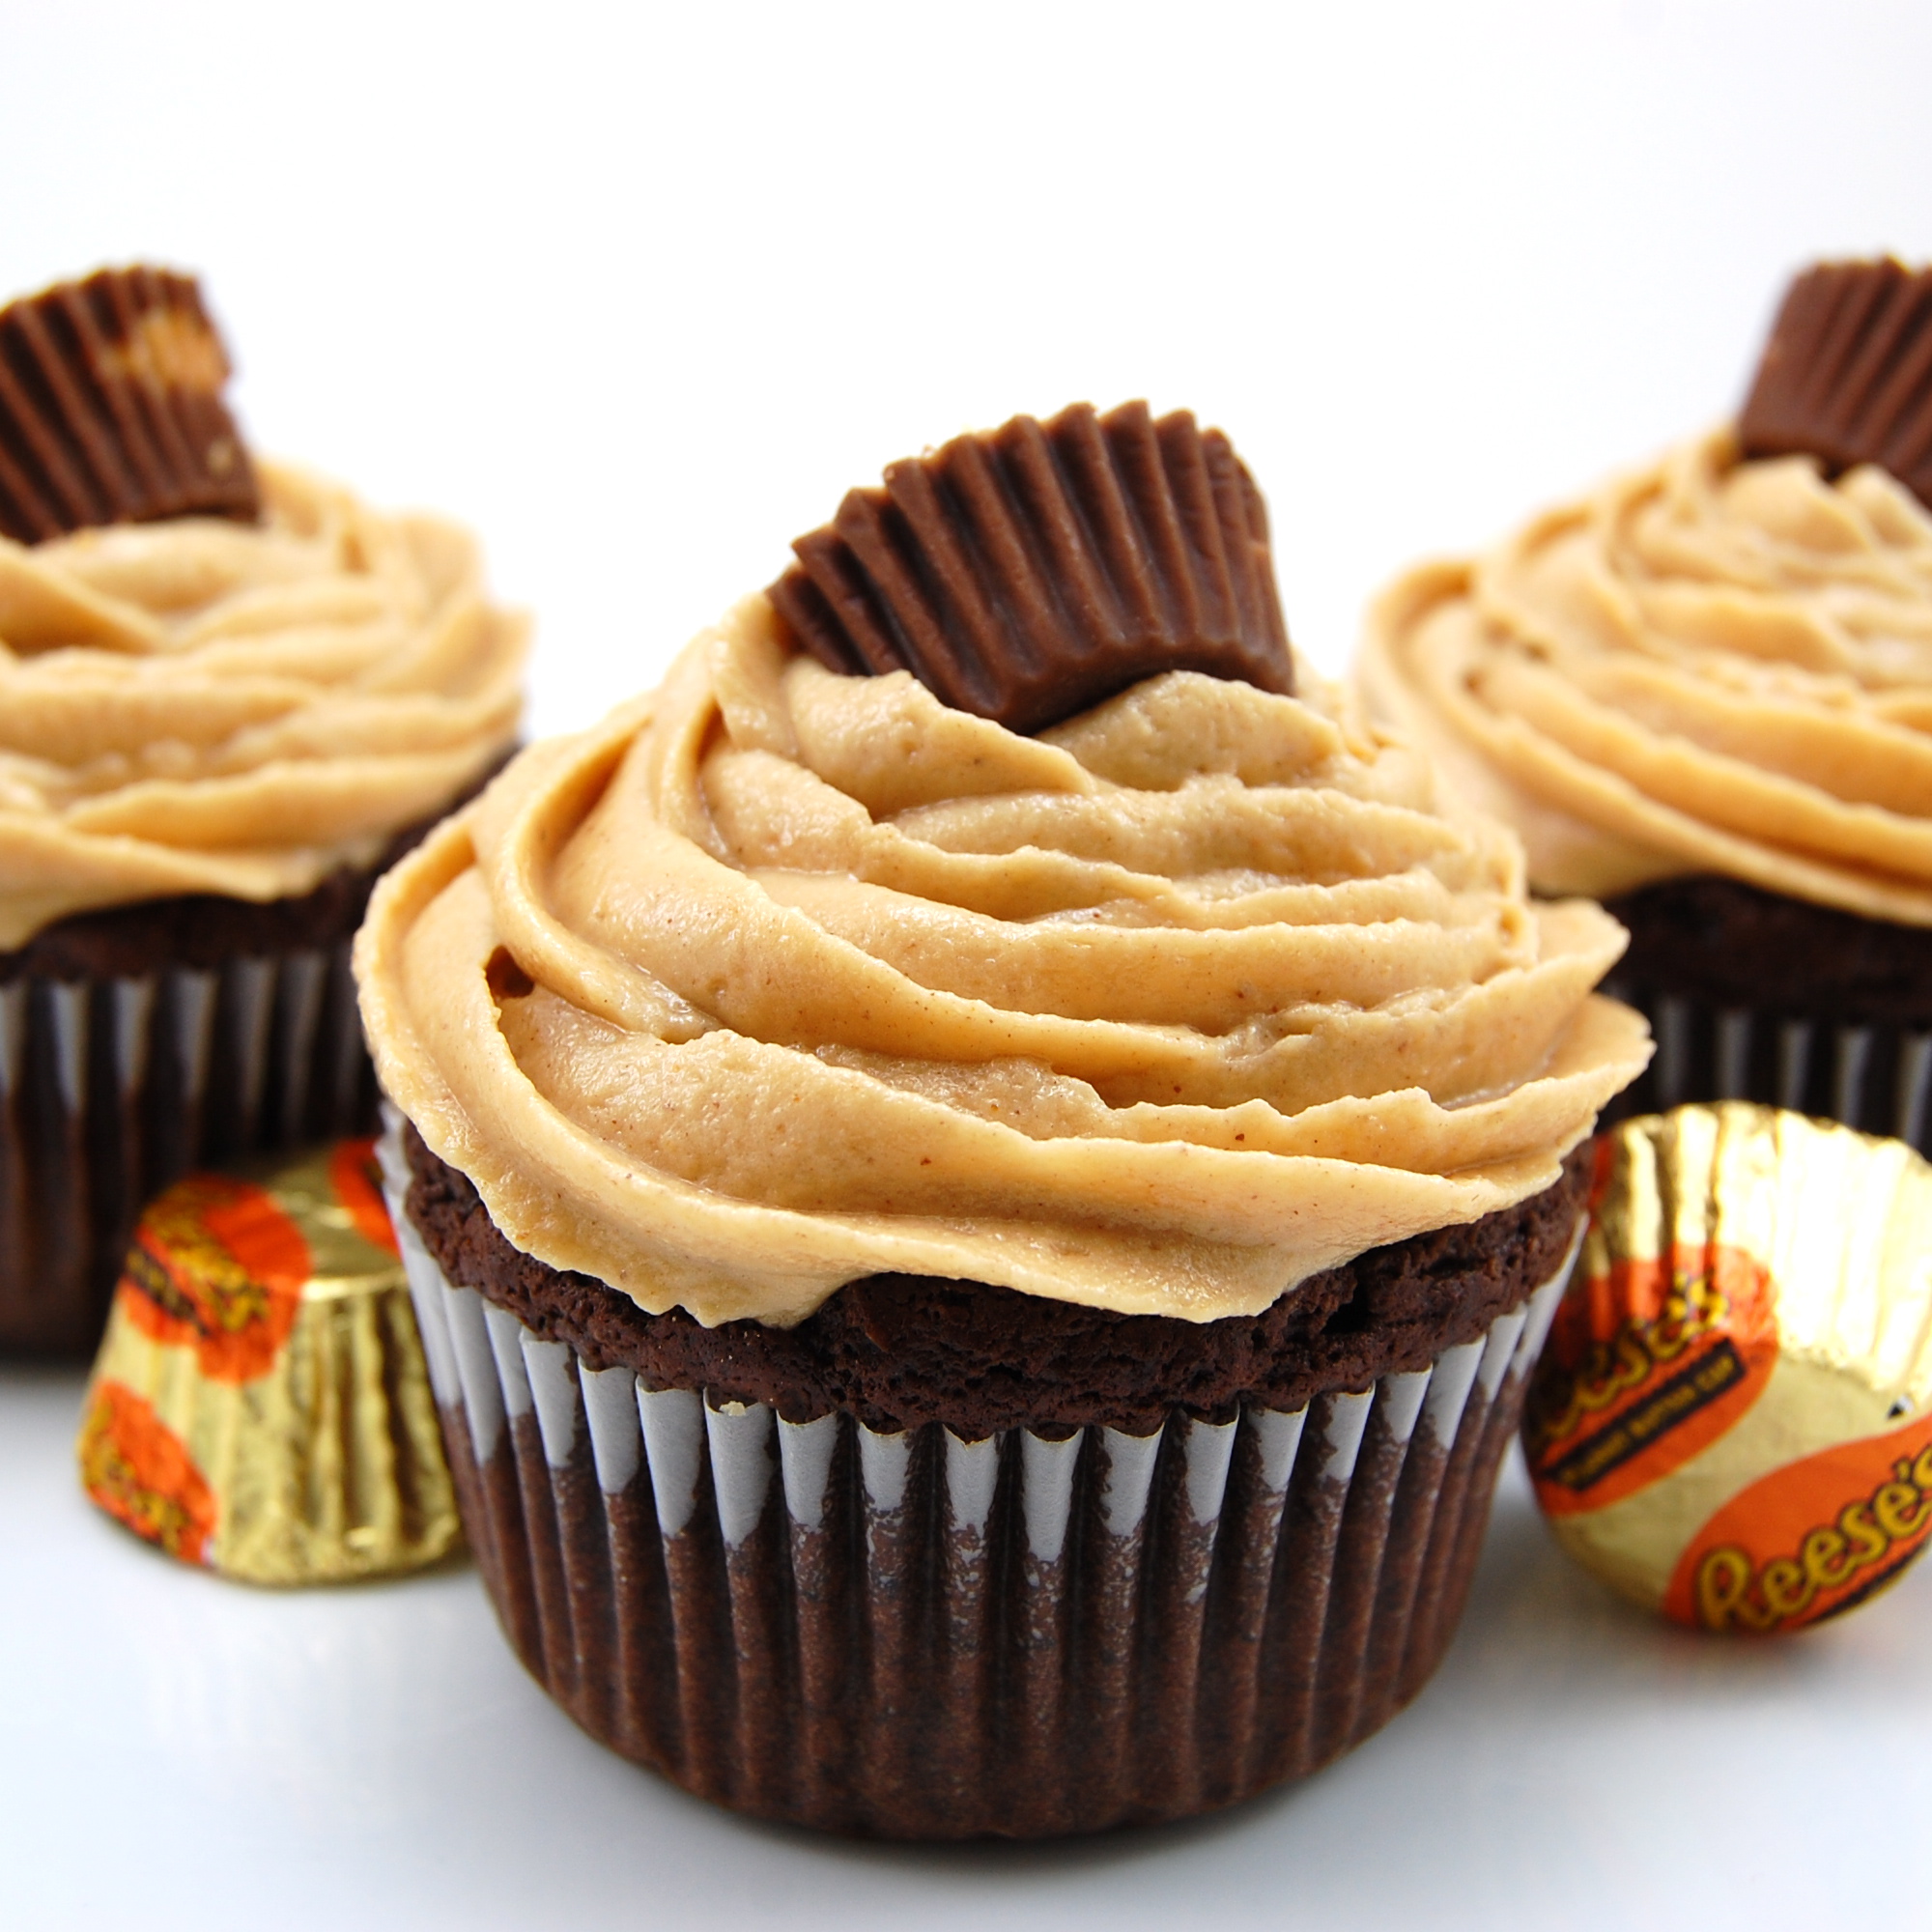 Reese's peanut butter cupcakes